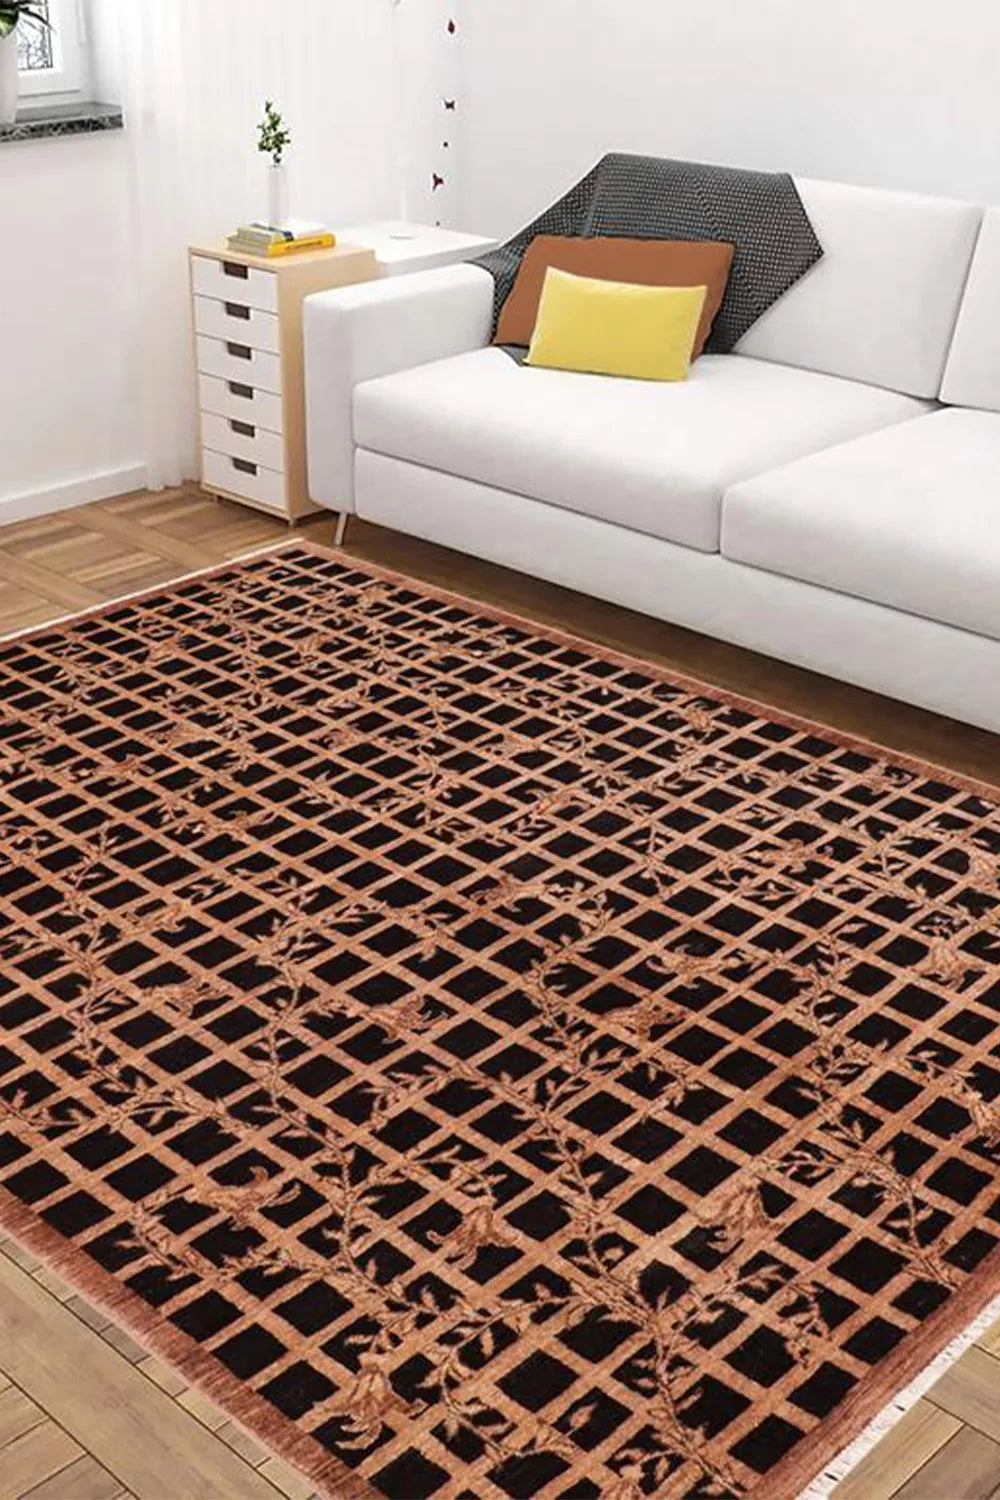 black and gold checkered rug, combining traditional craftsmanship with modern style